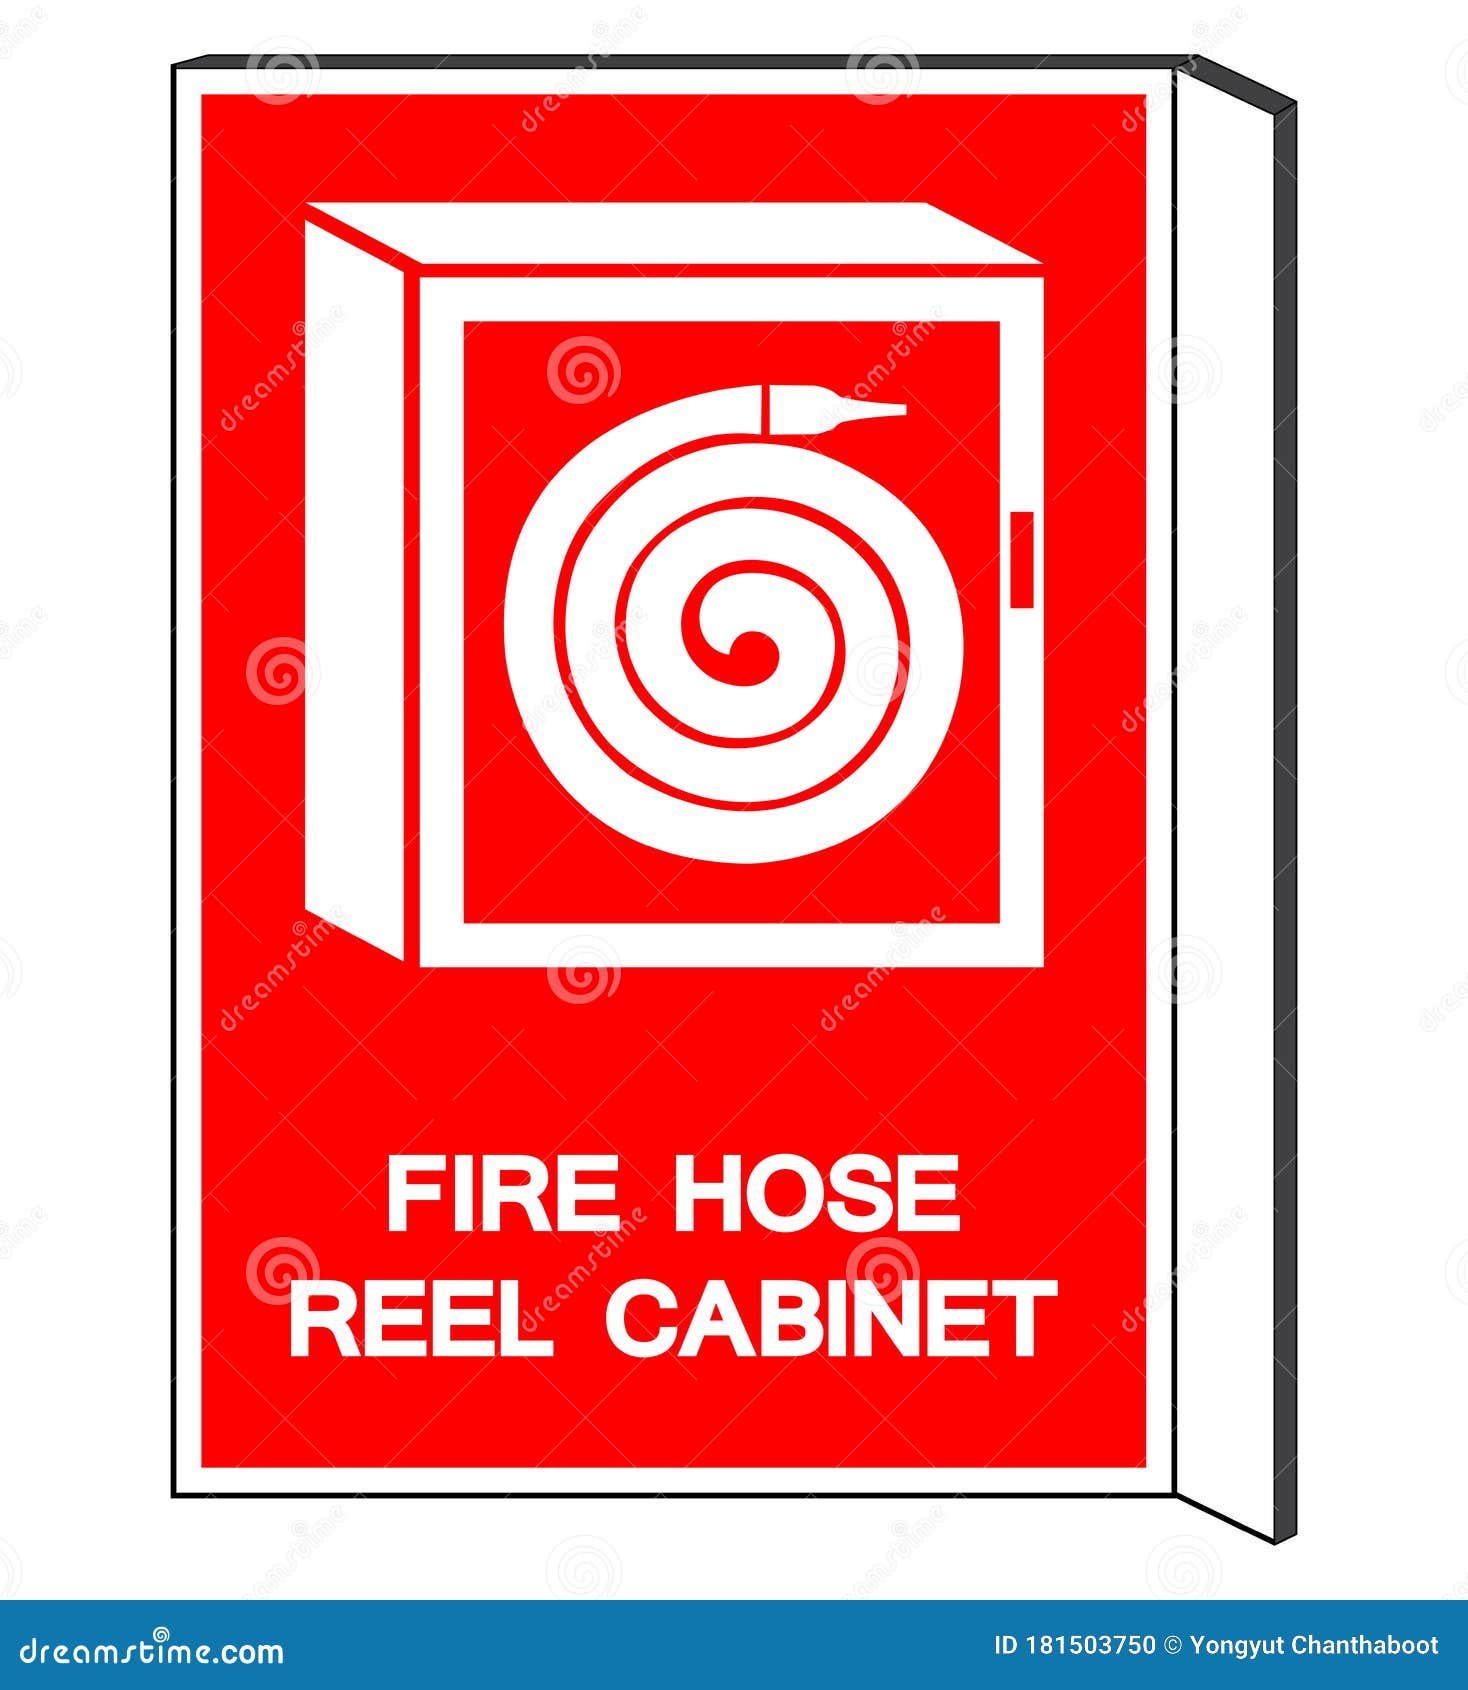 Fire Hose Reel Cabinet Symbol Sign, Vector Illustration, Isolate on White  Background Label. EPS10 Stock Vector - Illustration of container, hydrant:  181503750